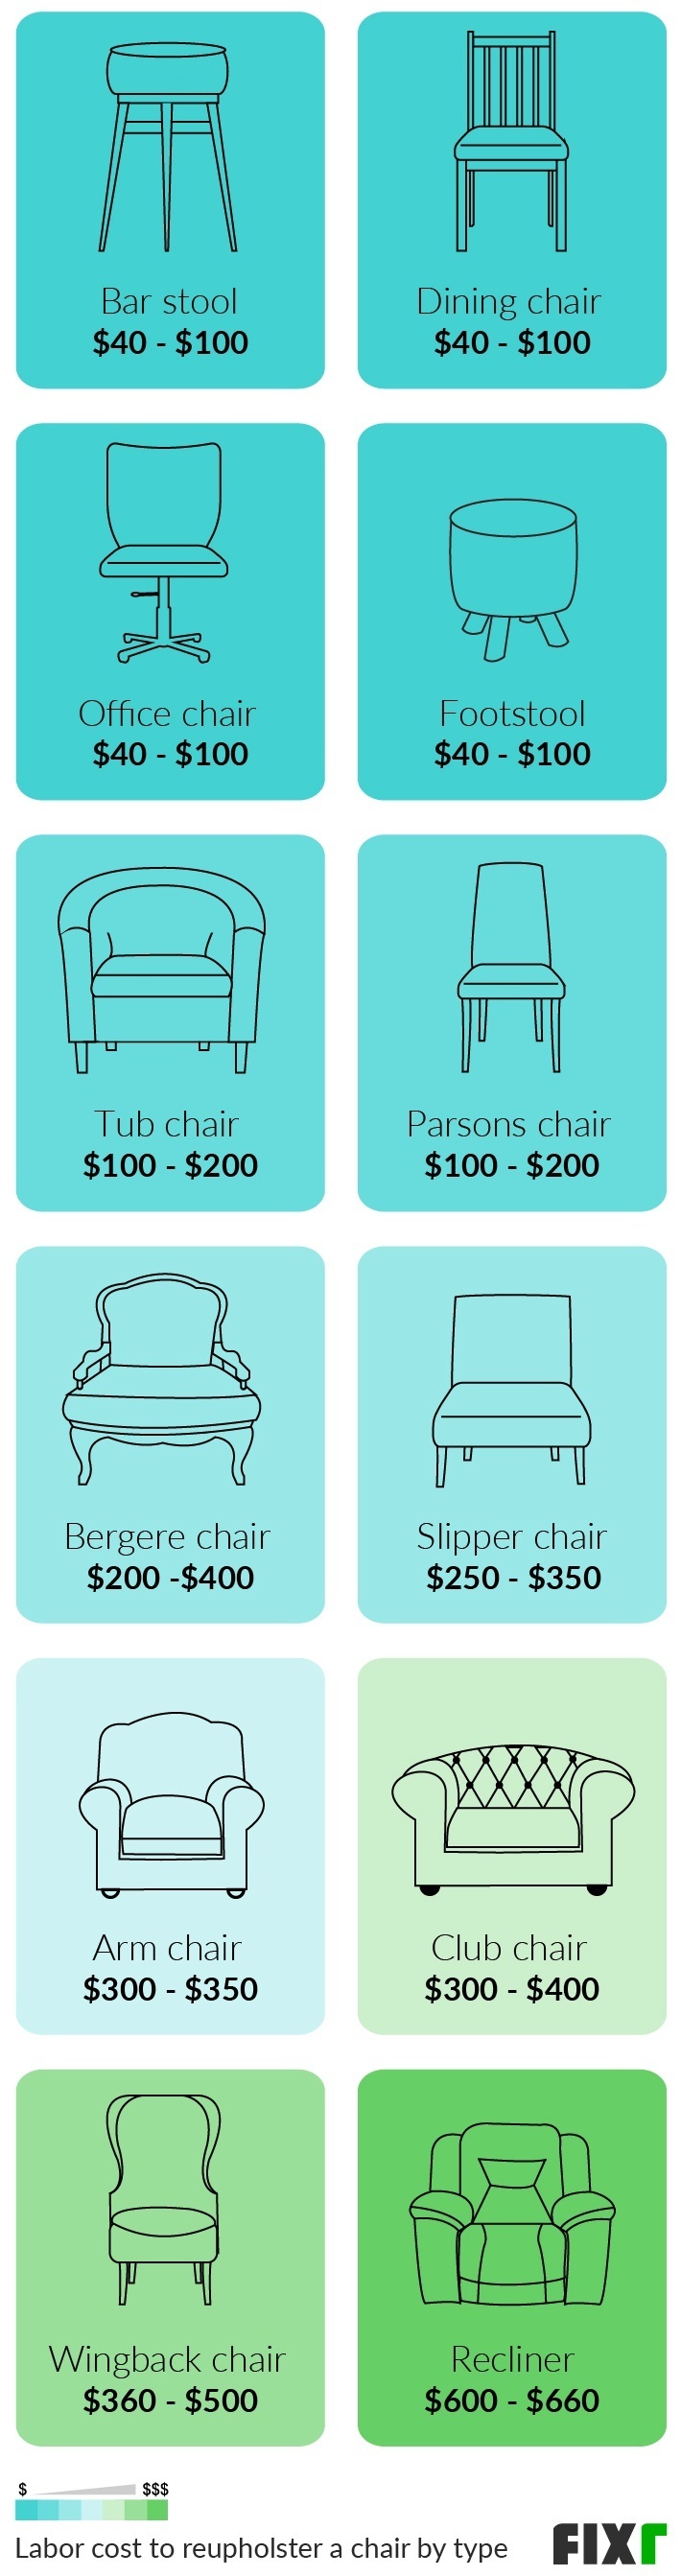 2021 Cost To Reupholster A Chair, Reupholster Dining Chairs Cost